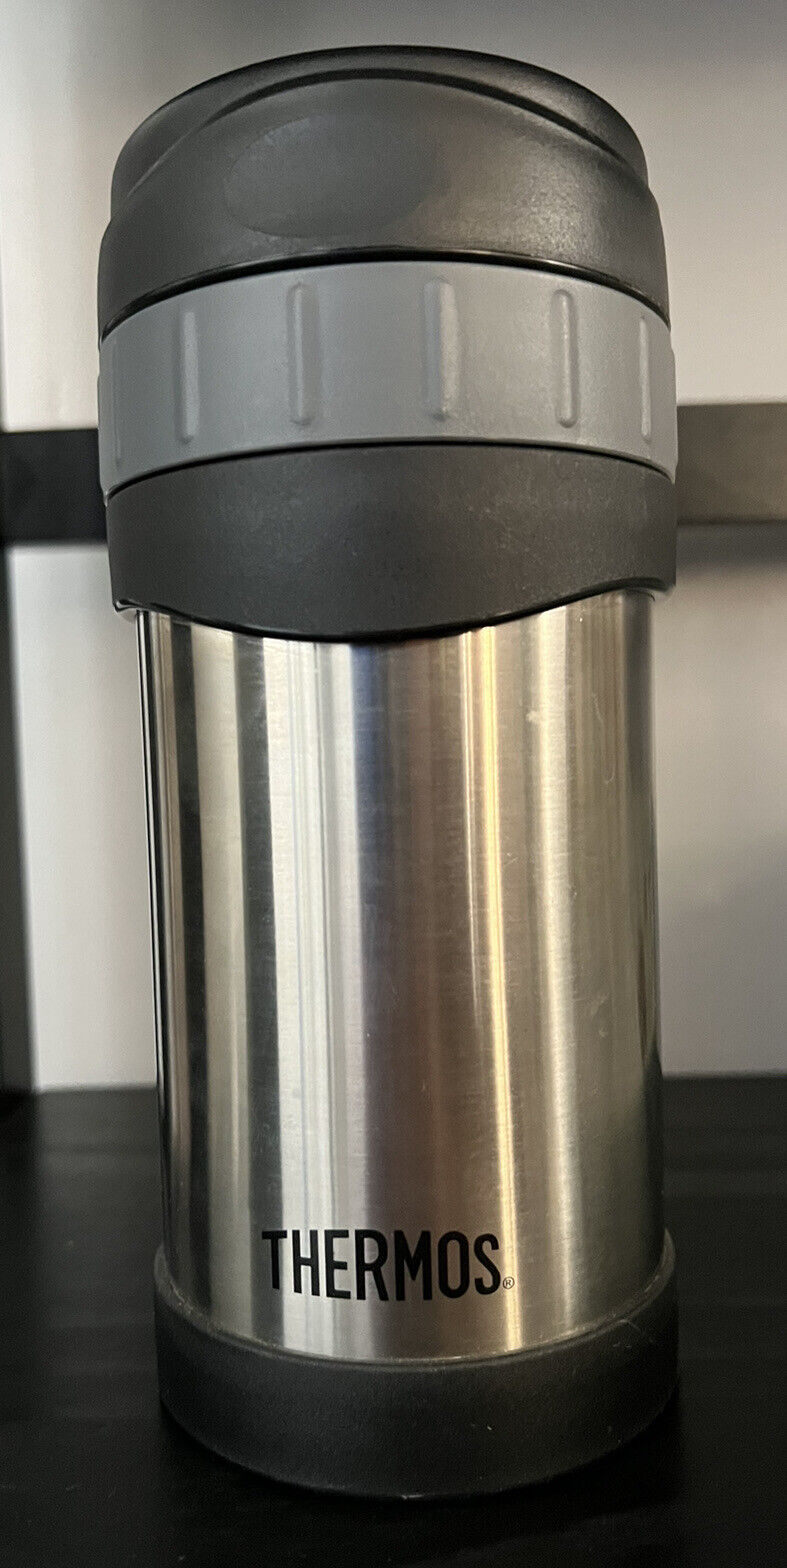 Thermos 2330tri6 Black/silver Stainless Steel Vacuum Insulated Food Jar 10  Oz. for sale online